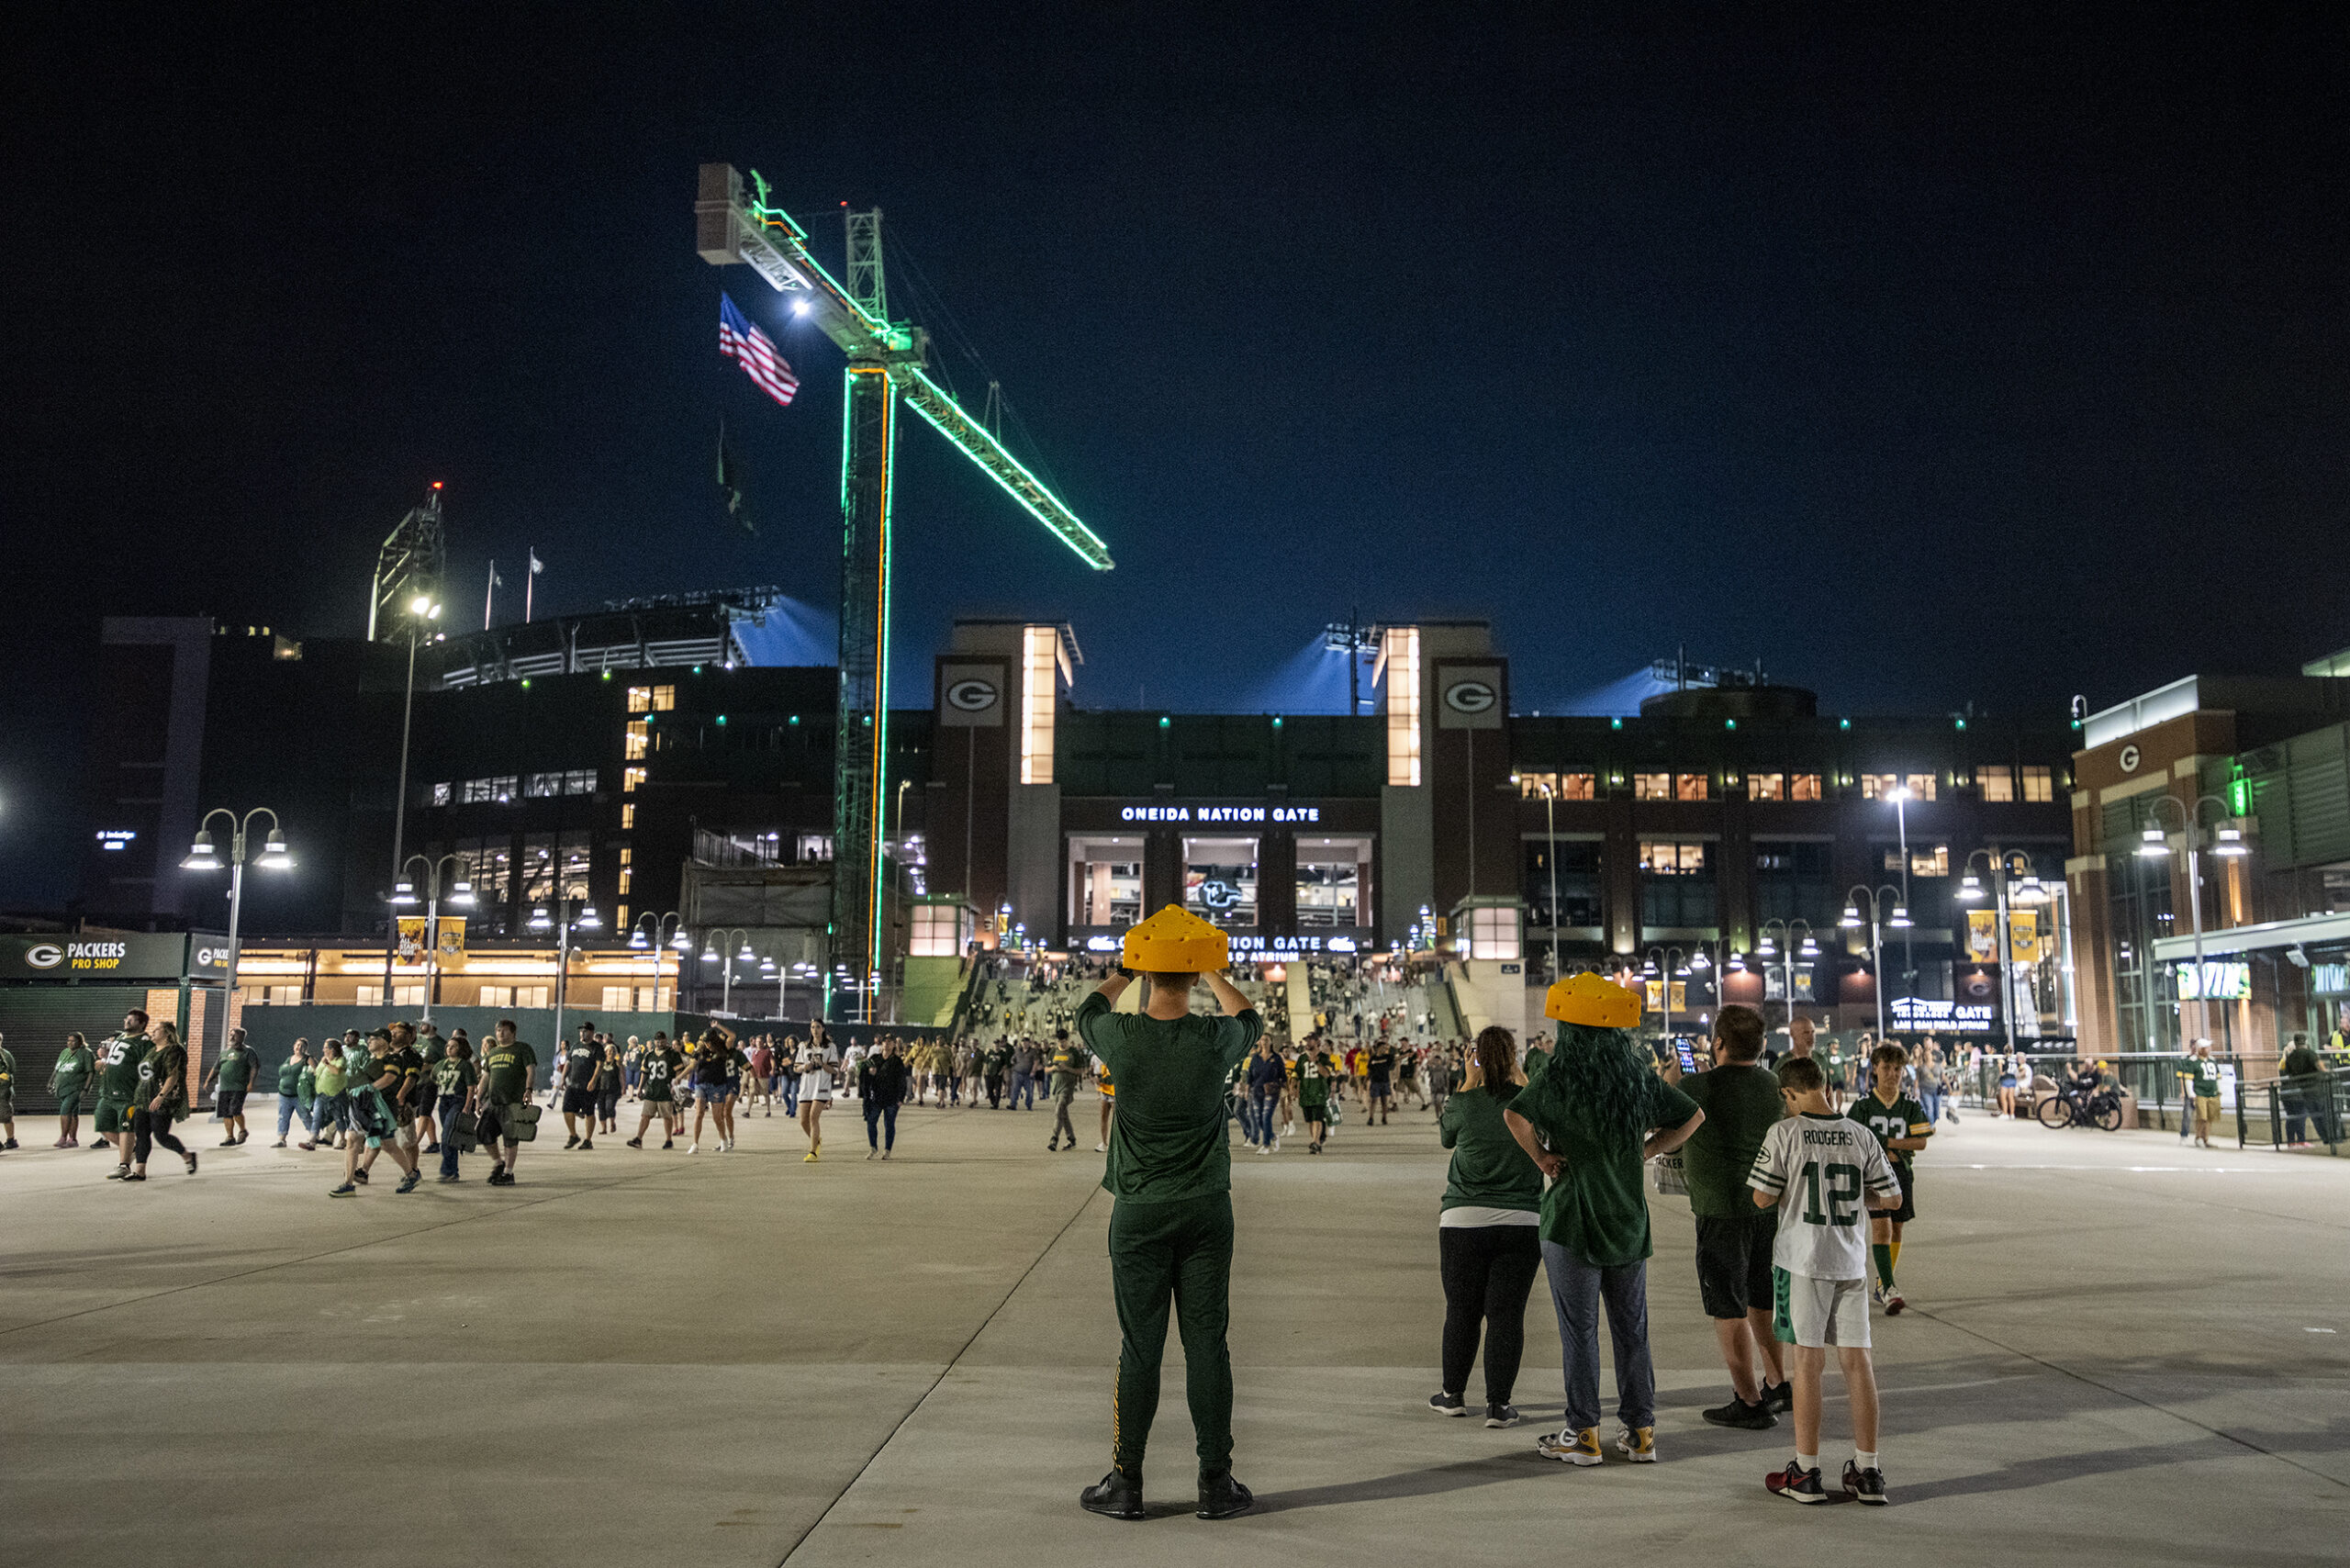 Fans wearing cheeseheads take photos of Lambeau Field against a night sky.